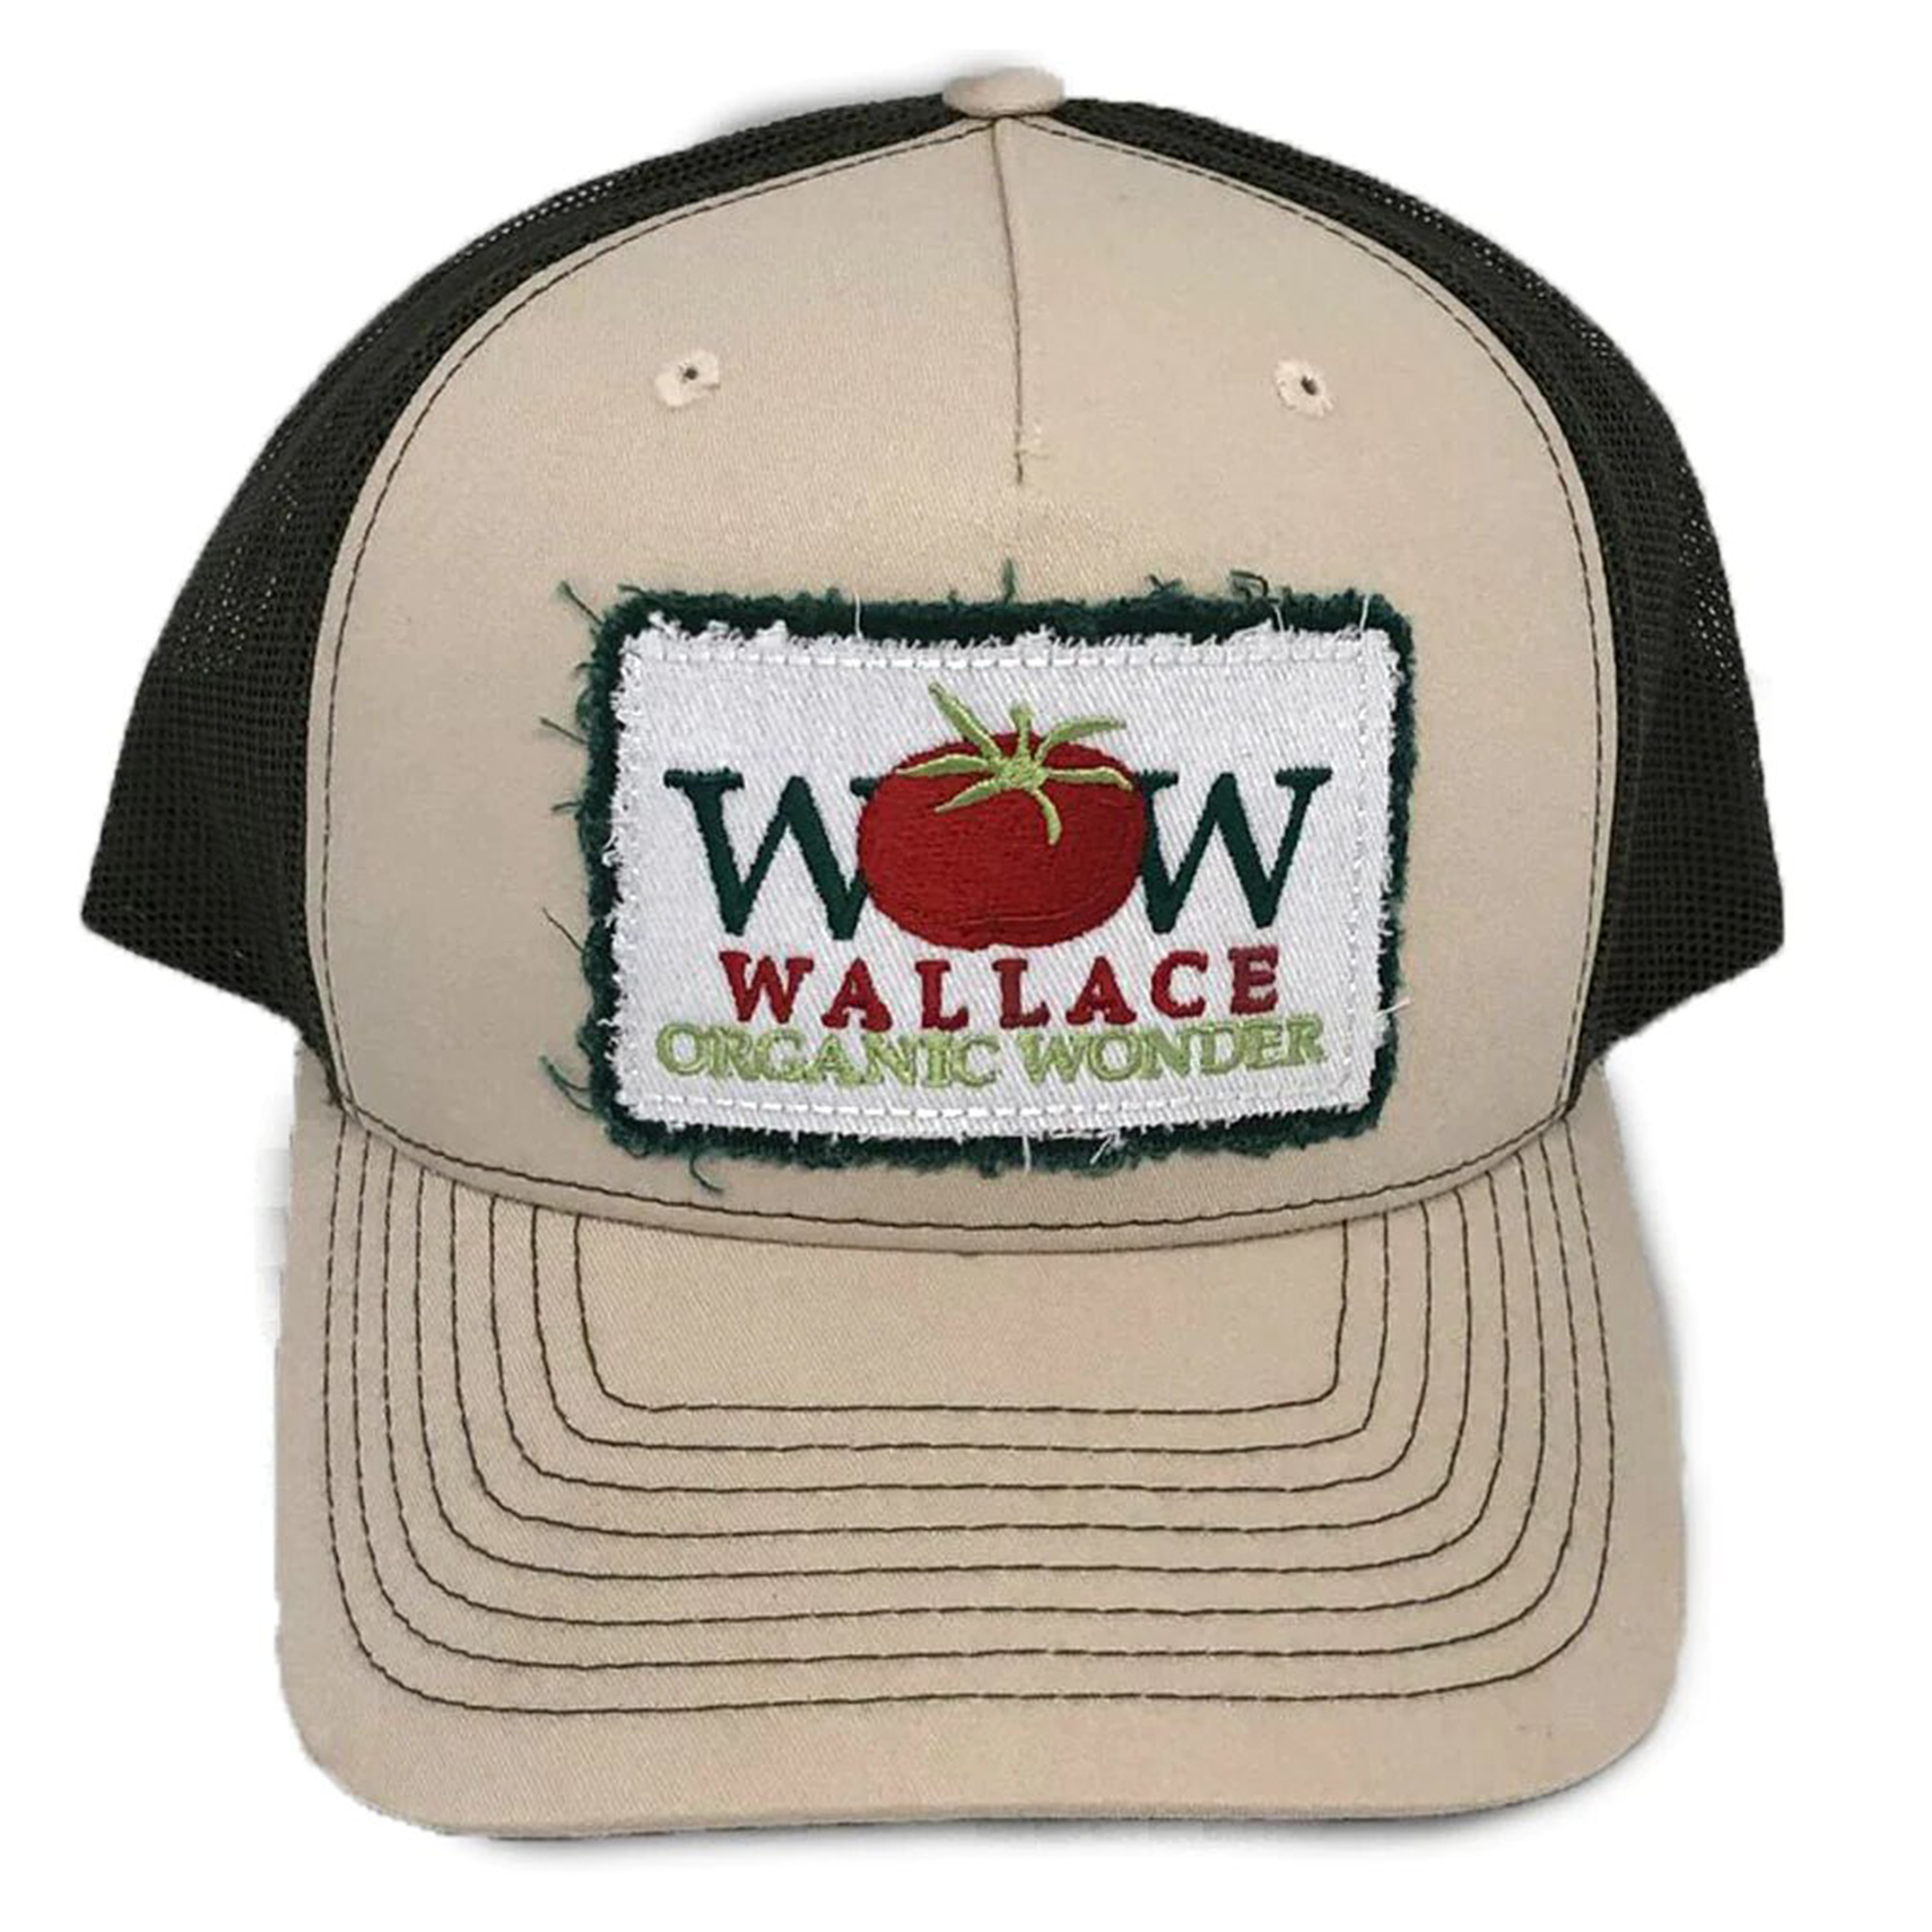 WOW Distressed Patch Trucker Cap